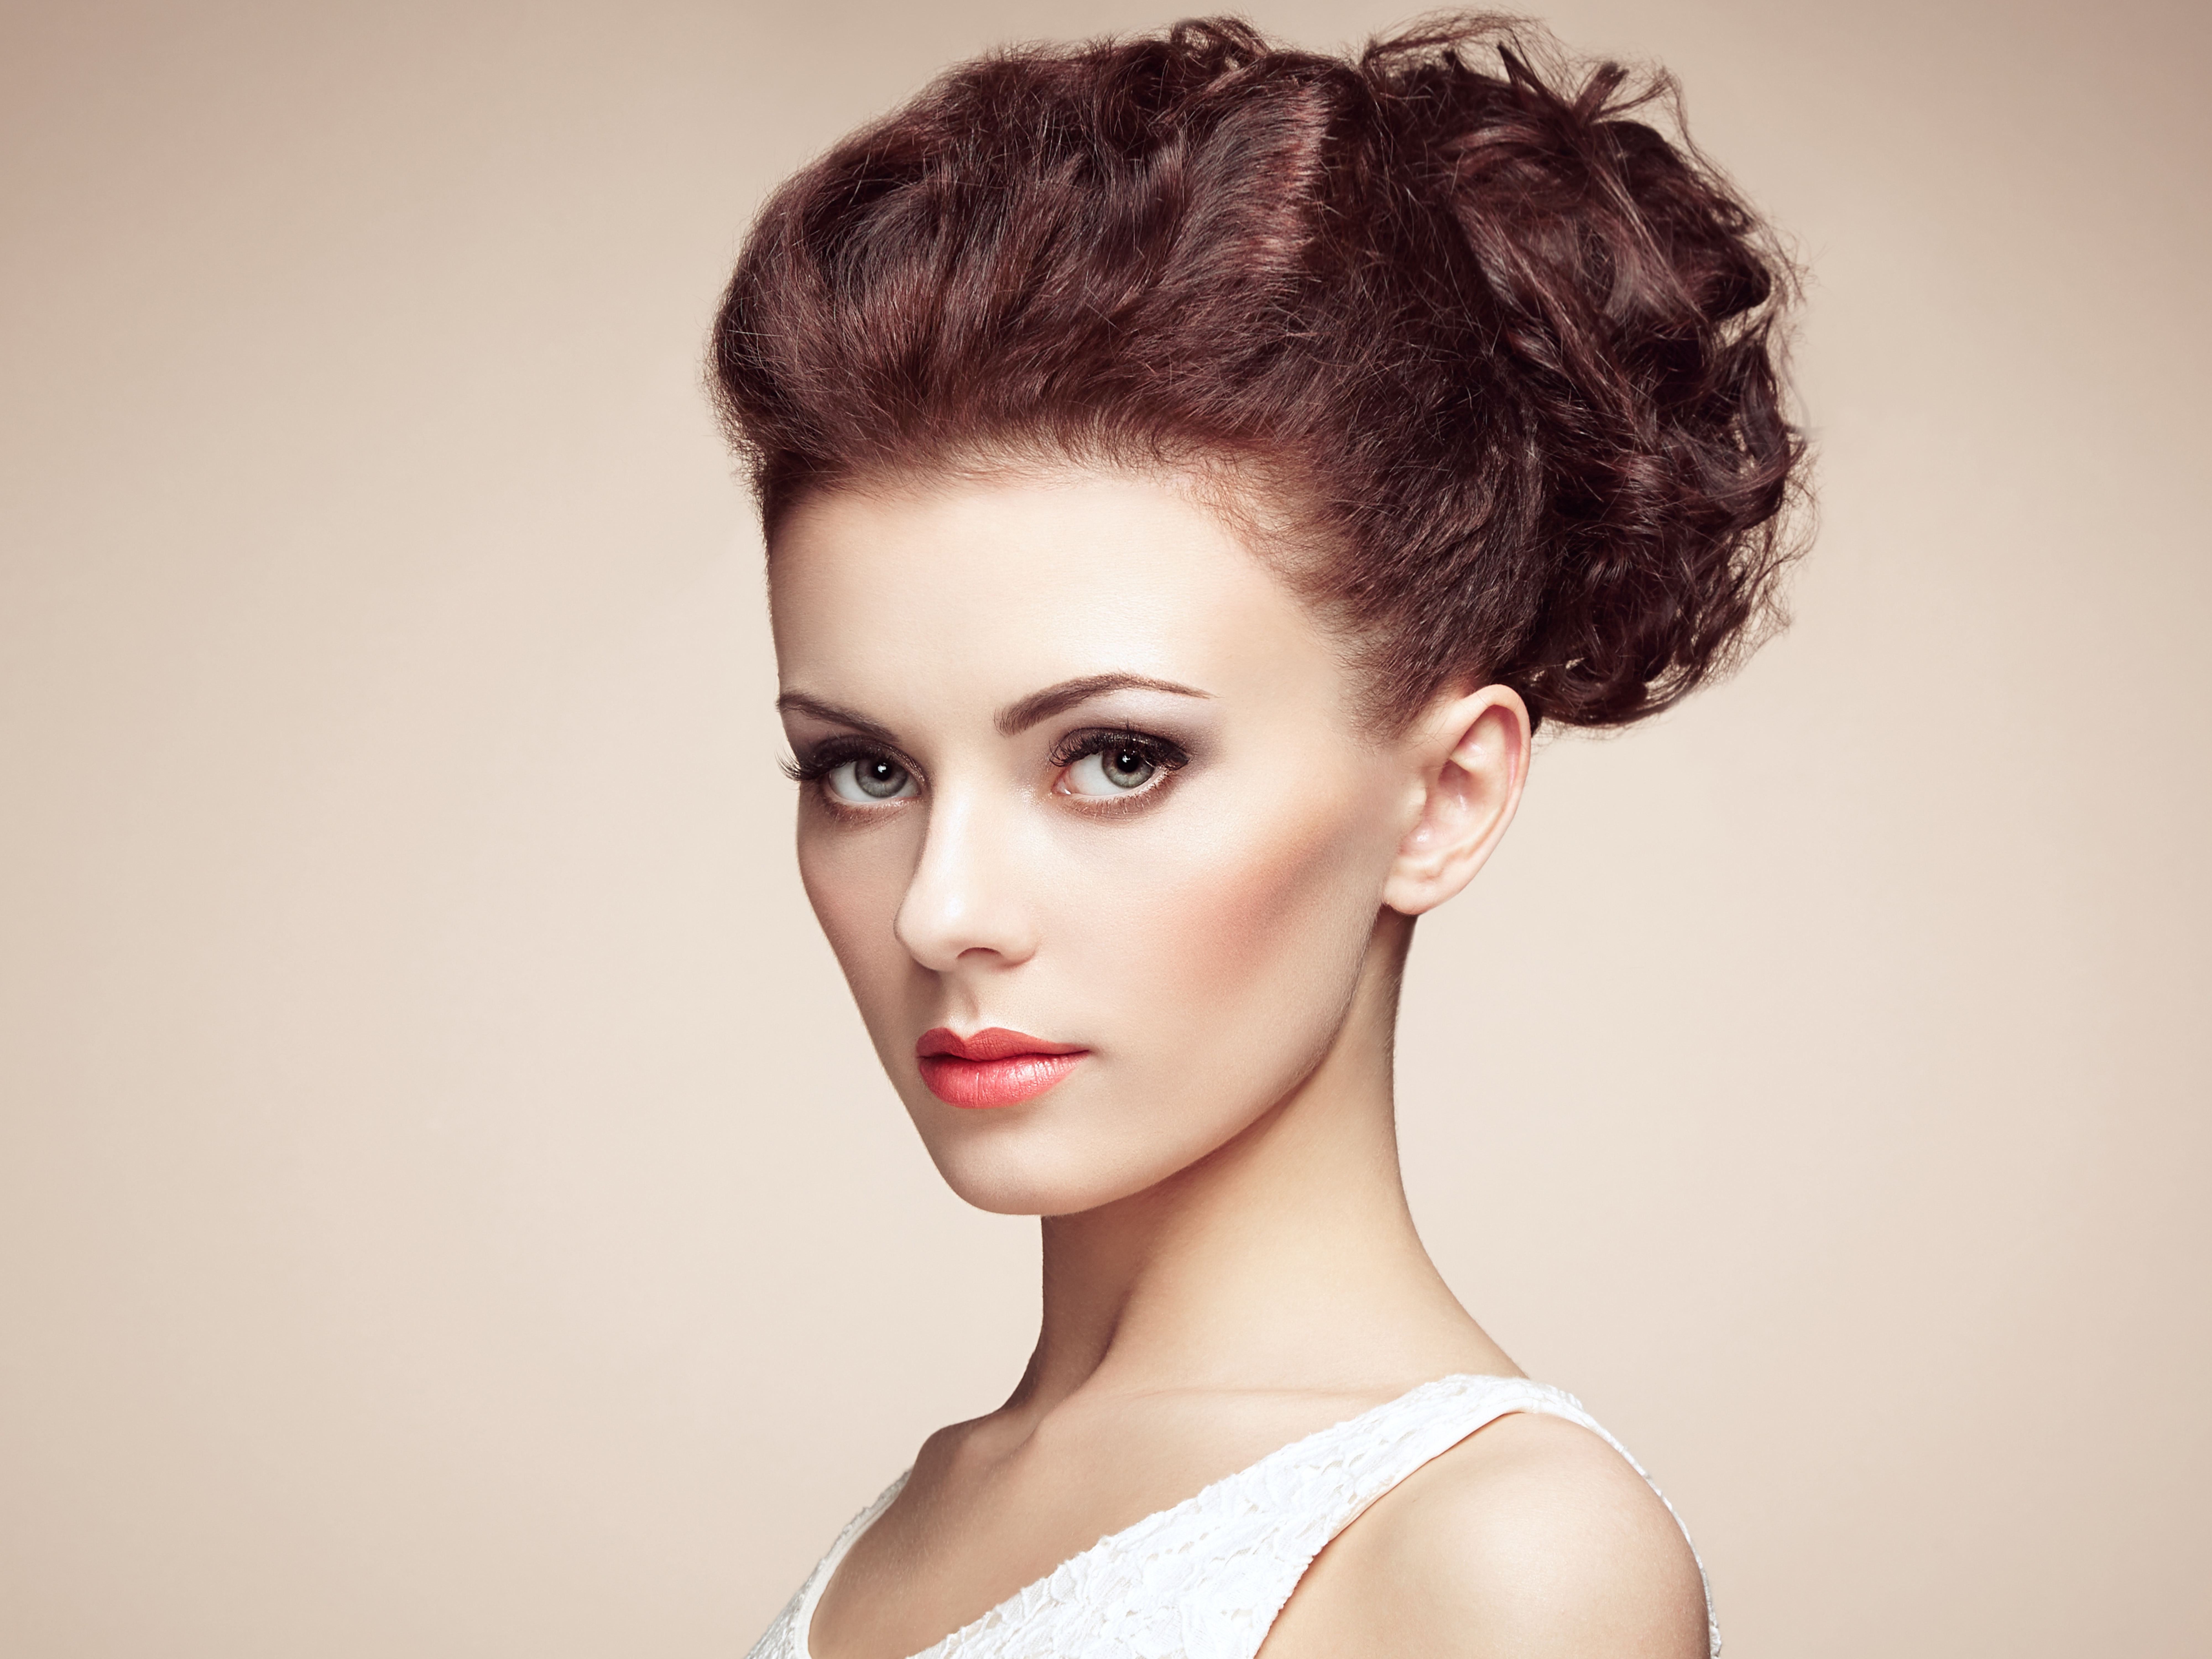 Portrait Of Beautiful Sensual Woman With Elegant Hairstyle By Oleg